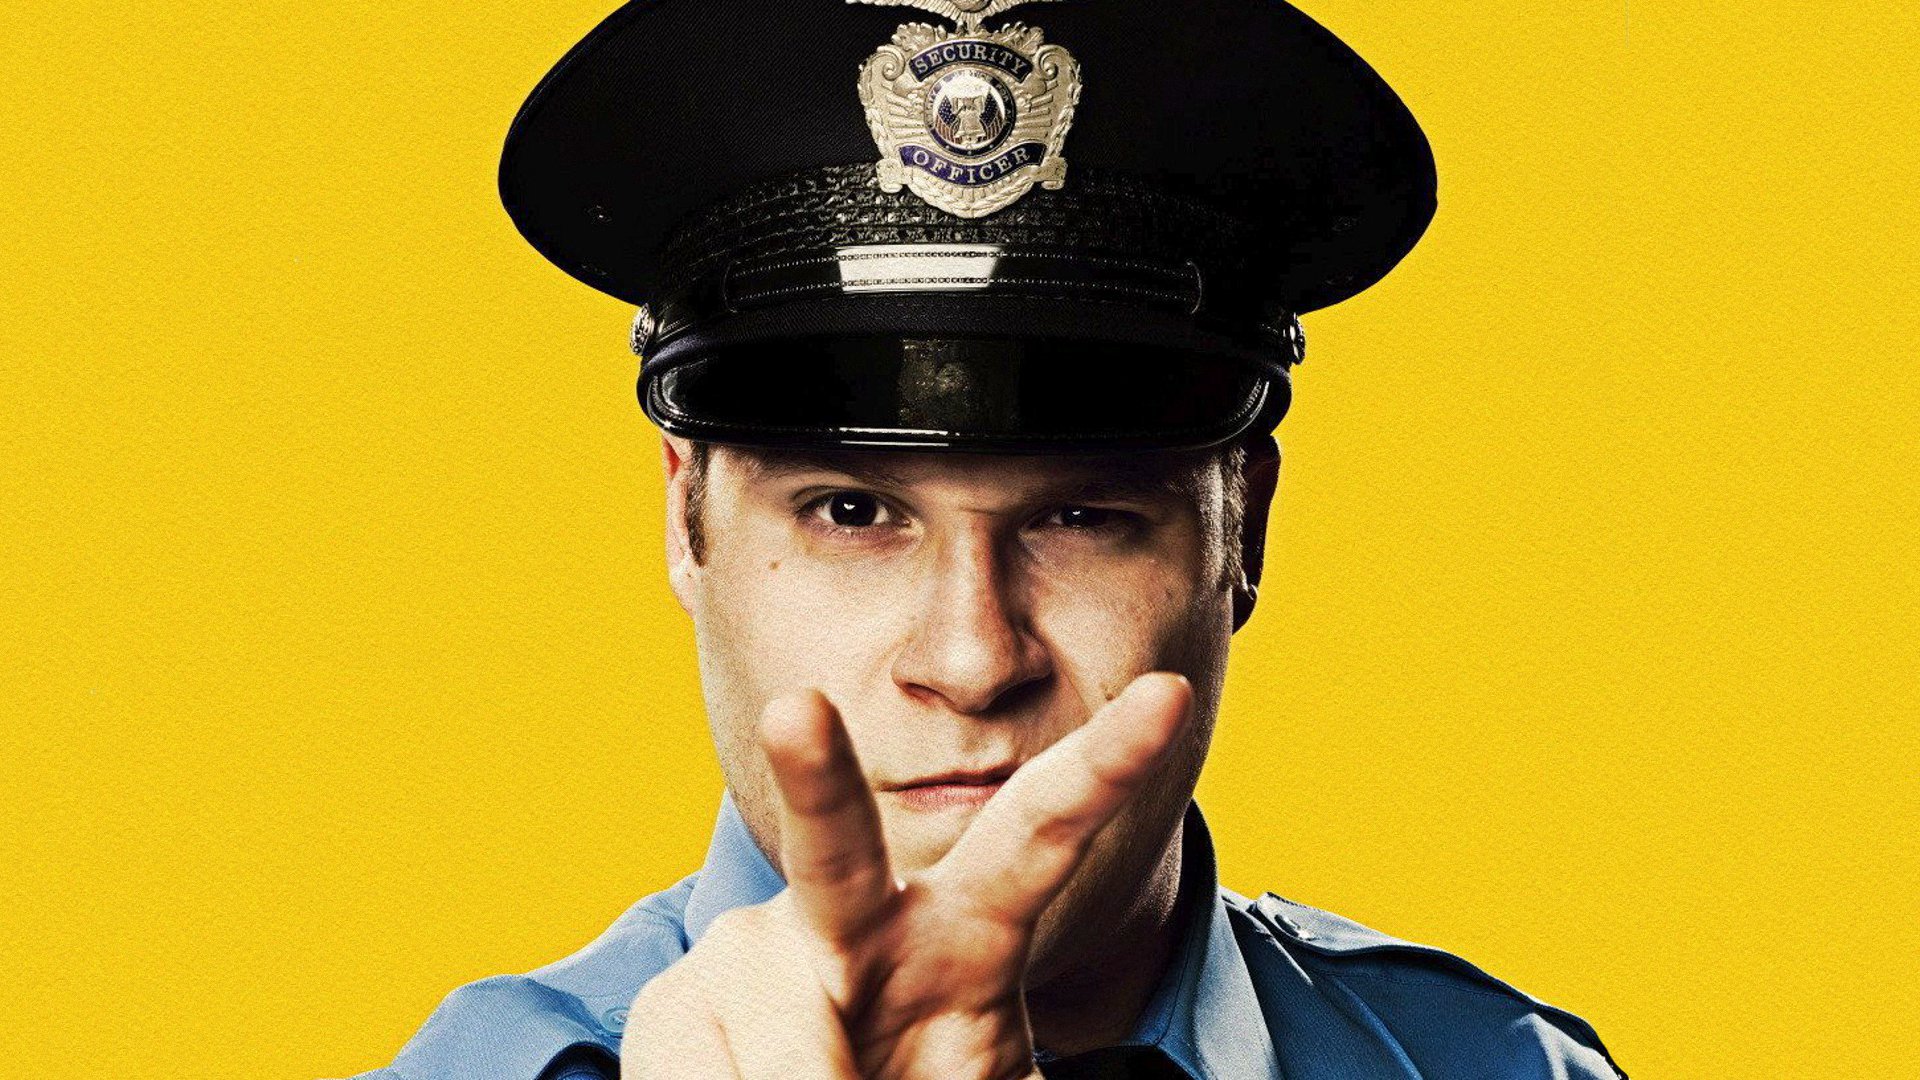 Movie Observe and Report HD Wallpaper | Background Image